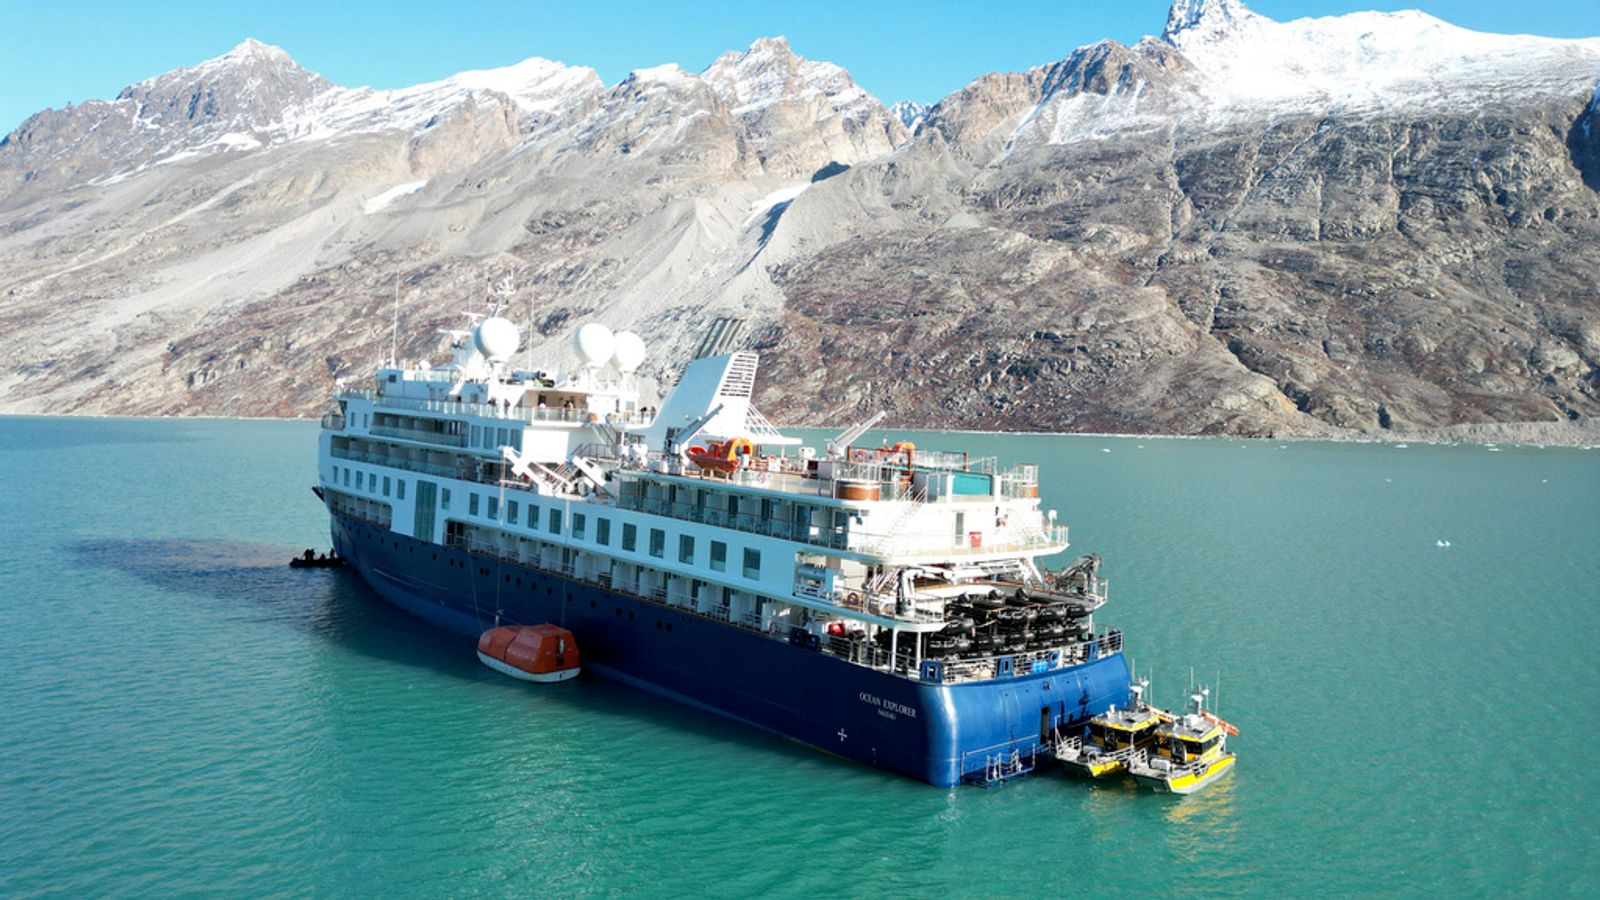 Concerns grow for stranded cruise ship in Greenland as third attempt to free vessel fails